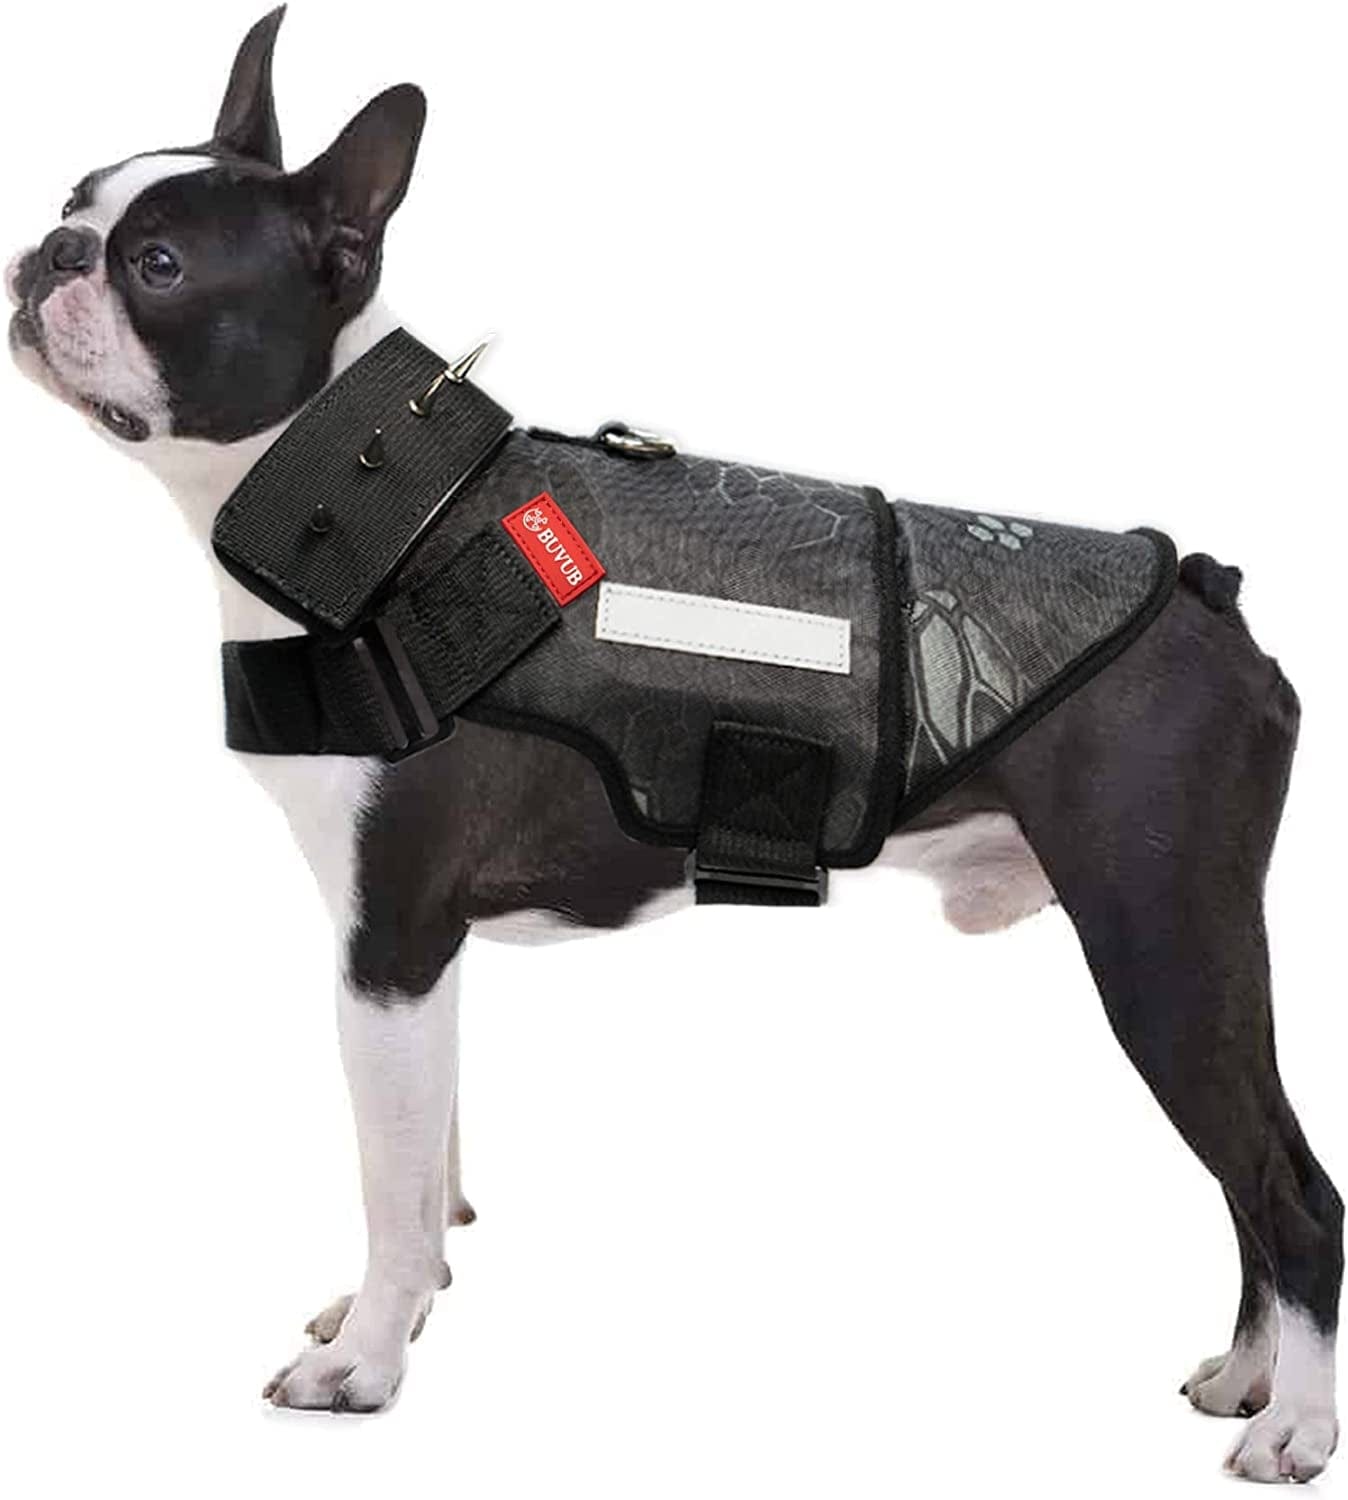  CoyoteVest Dog Harness Protection Vest, Reflective